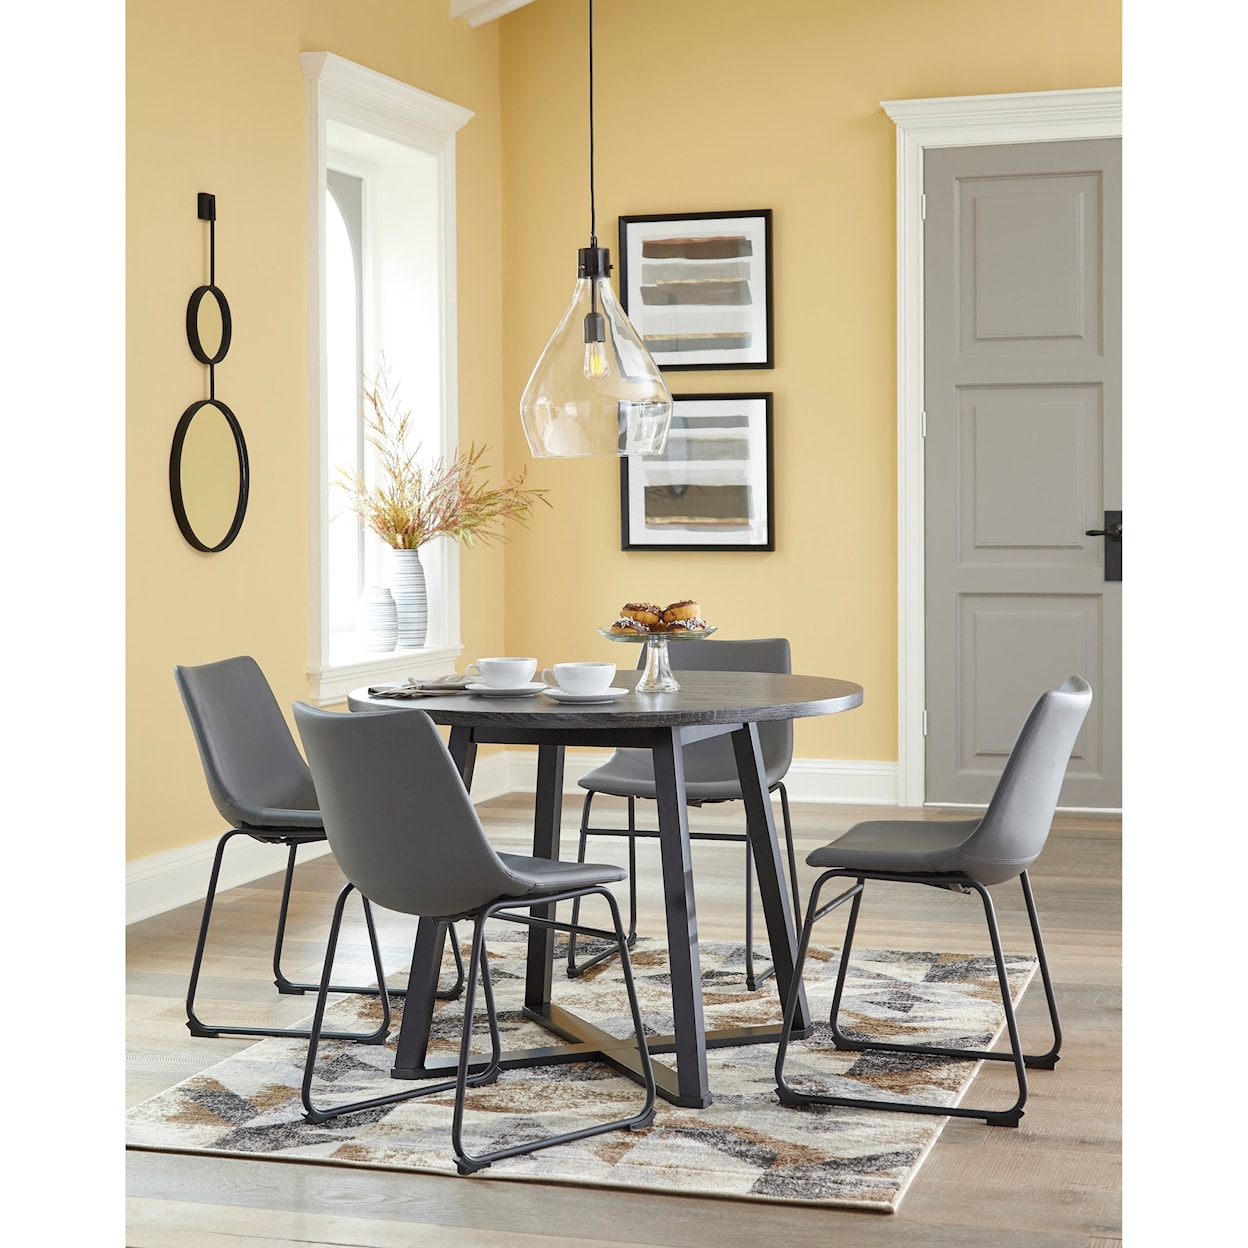 Signature Design by Ashley Pulman Round Dining Room Table